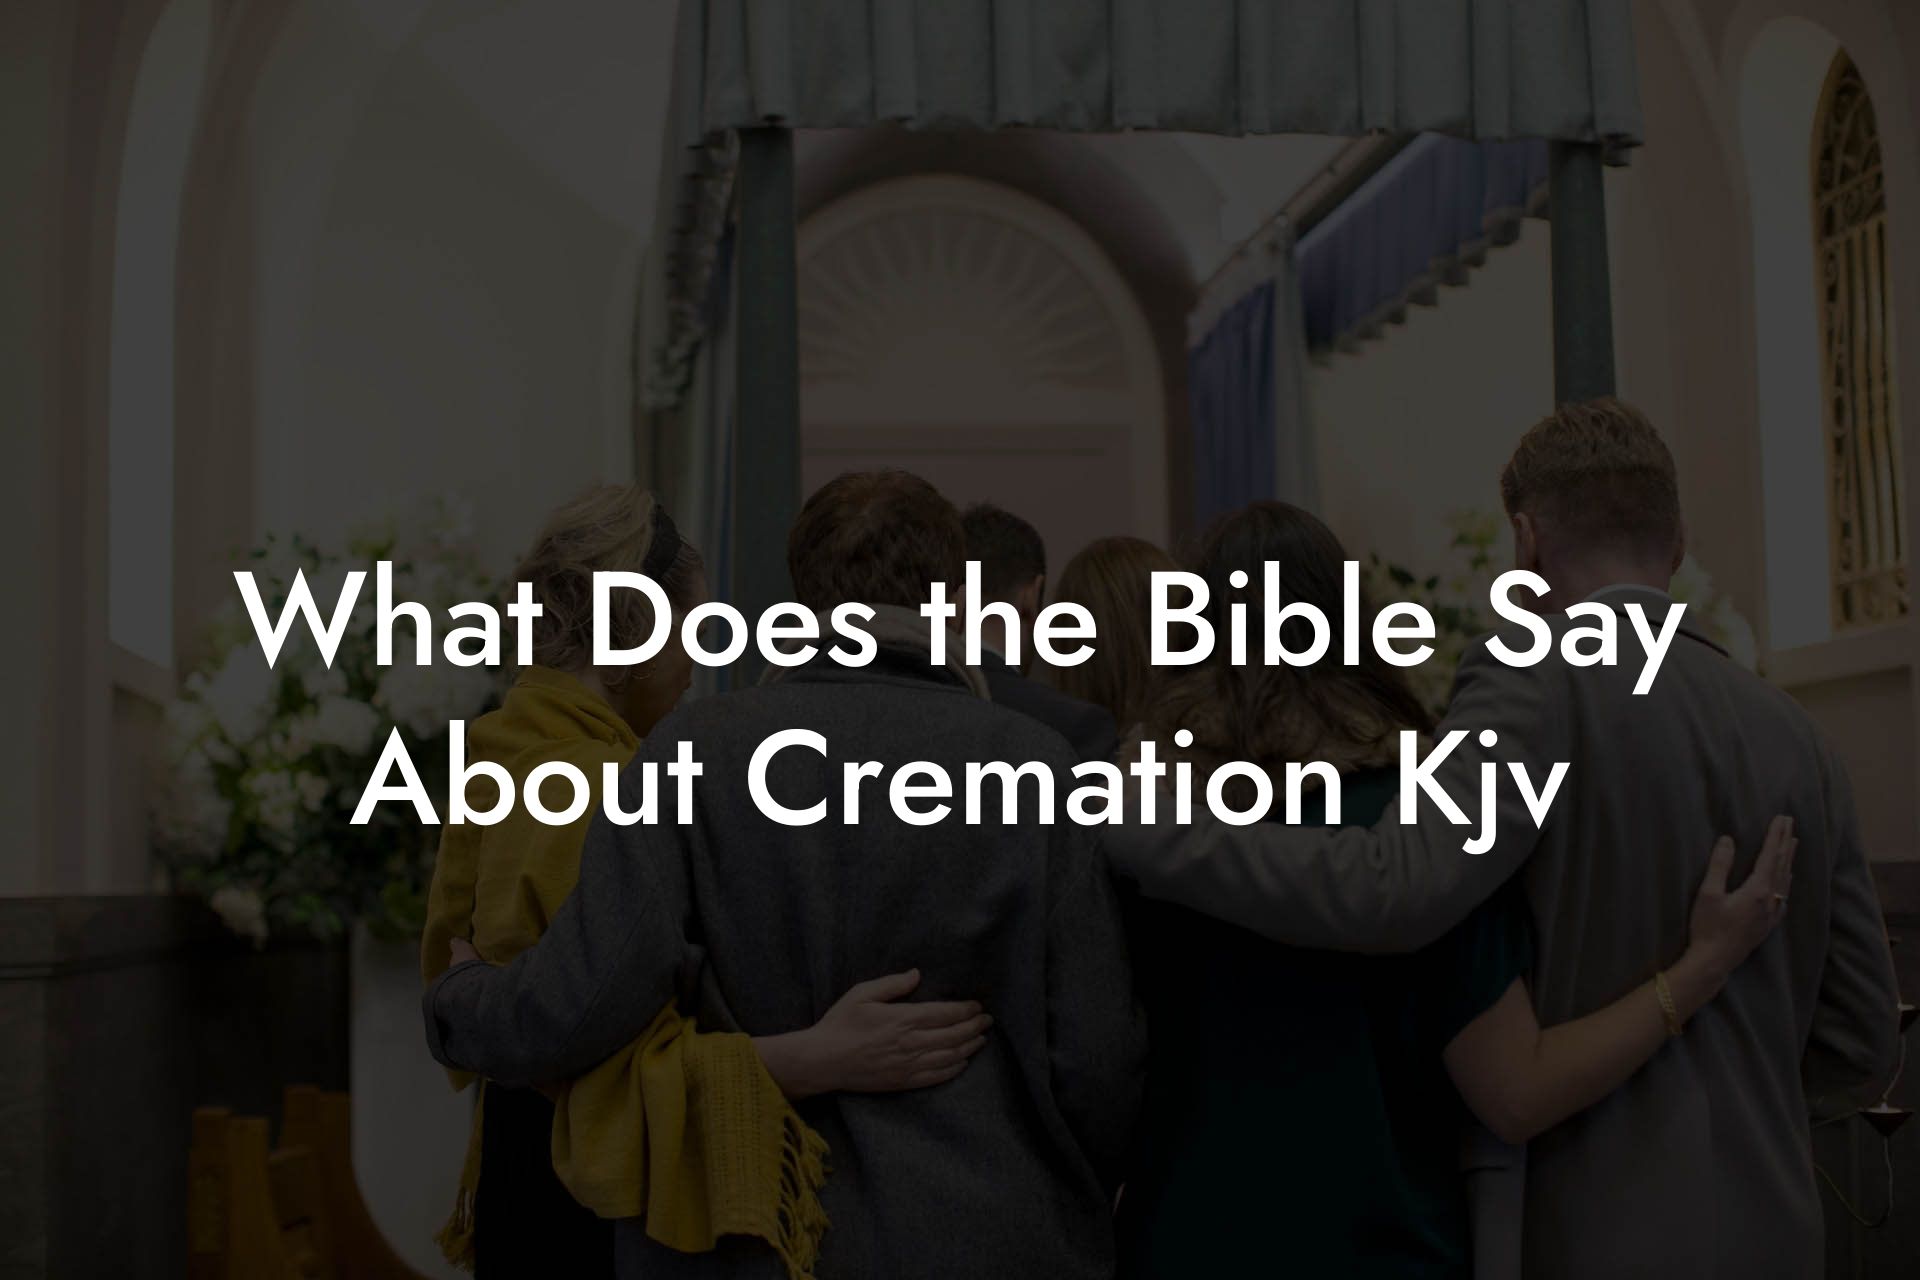 What Does the Bible Say About Cremation Kjv